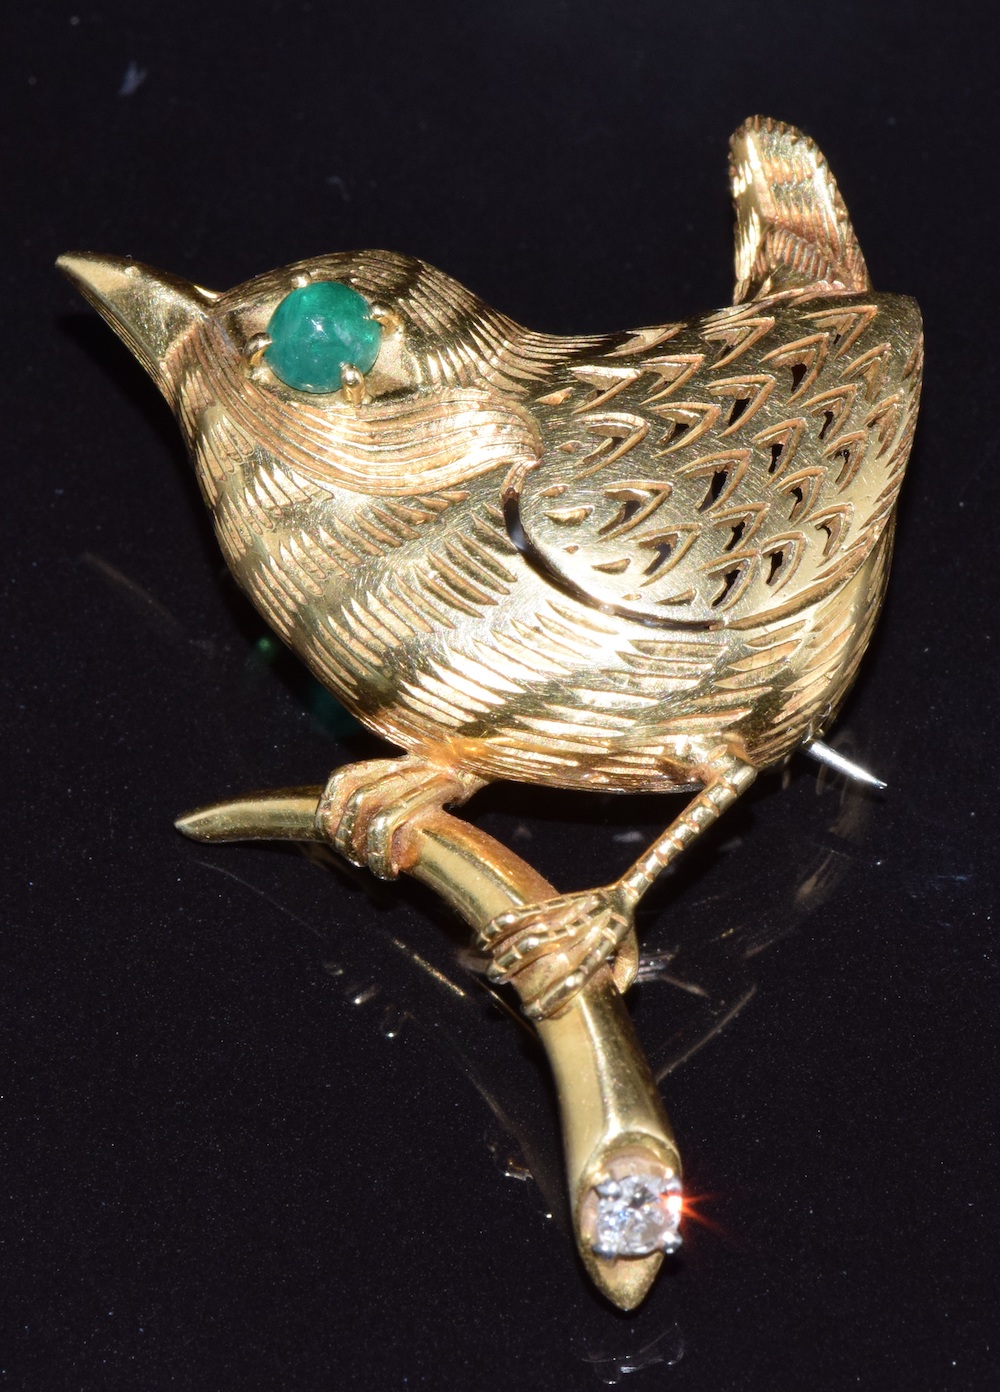 Cartier 1963 Novelty Bird Brooch Modelled As A Wren Perched On A Branch. Sold For £2,800